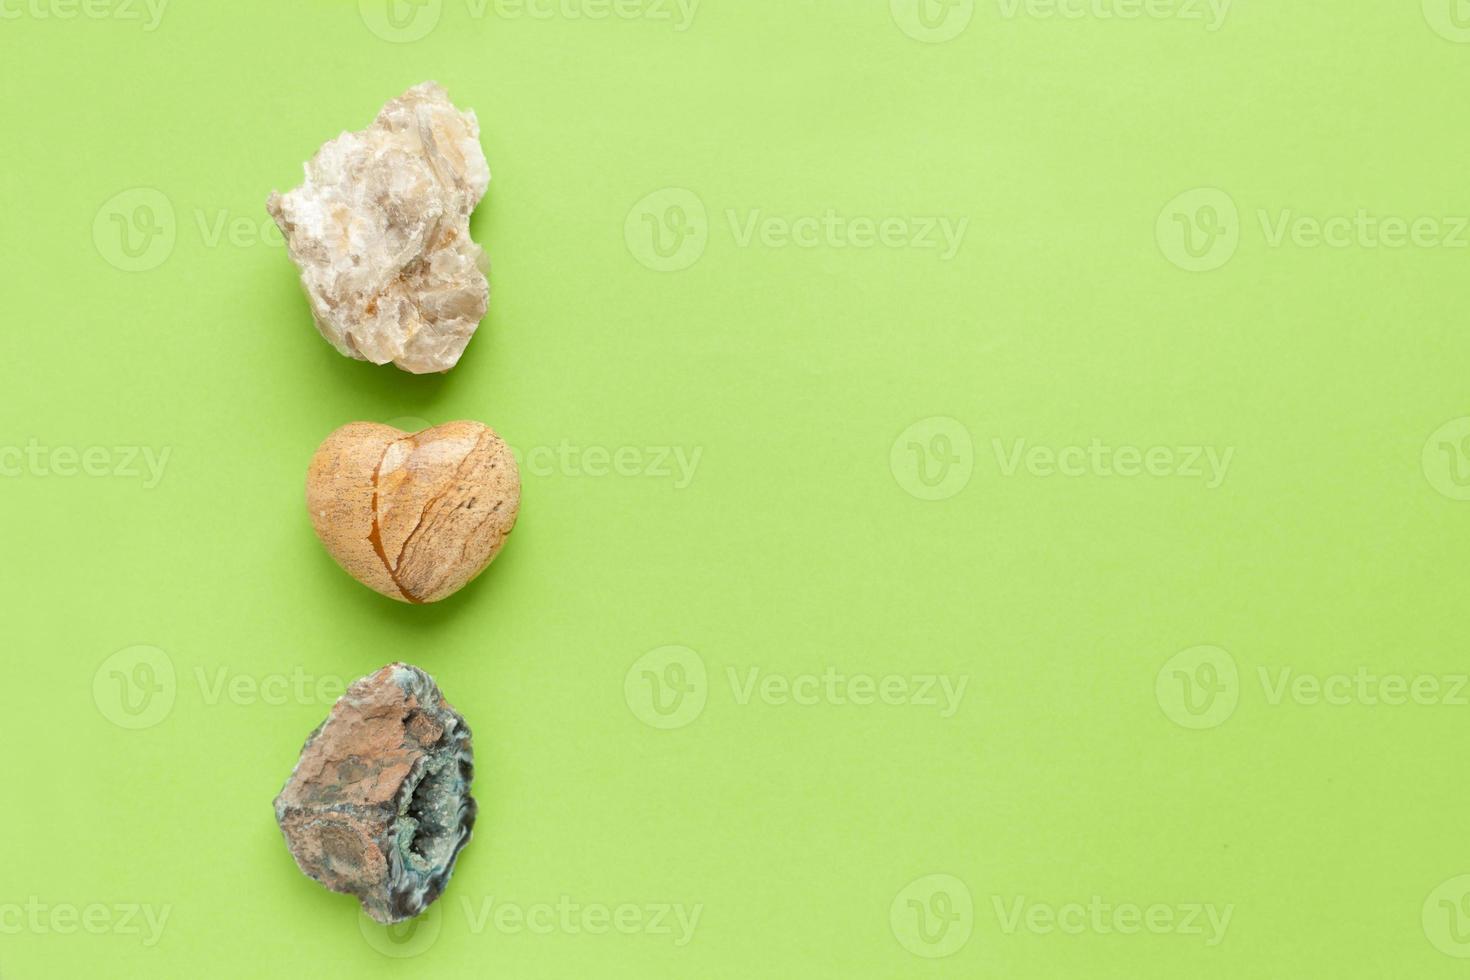 Backgrounds and textures, nature concept - rocks and minerals. Different minerals and heart stone on green background. photo